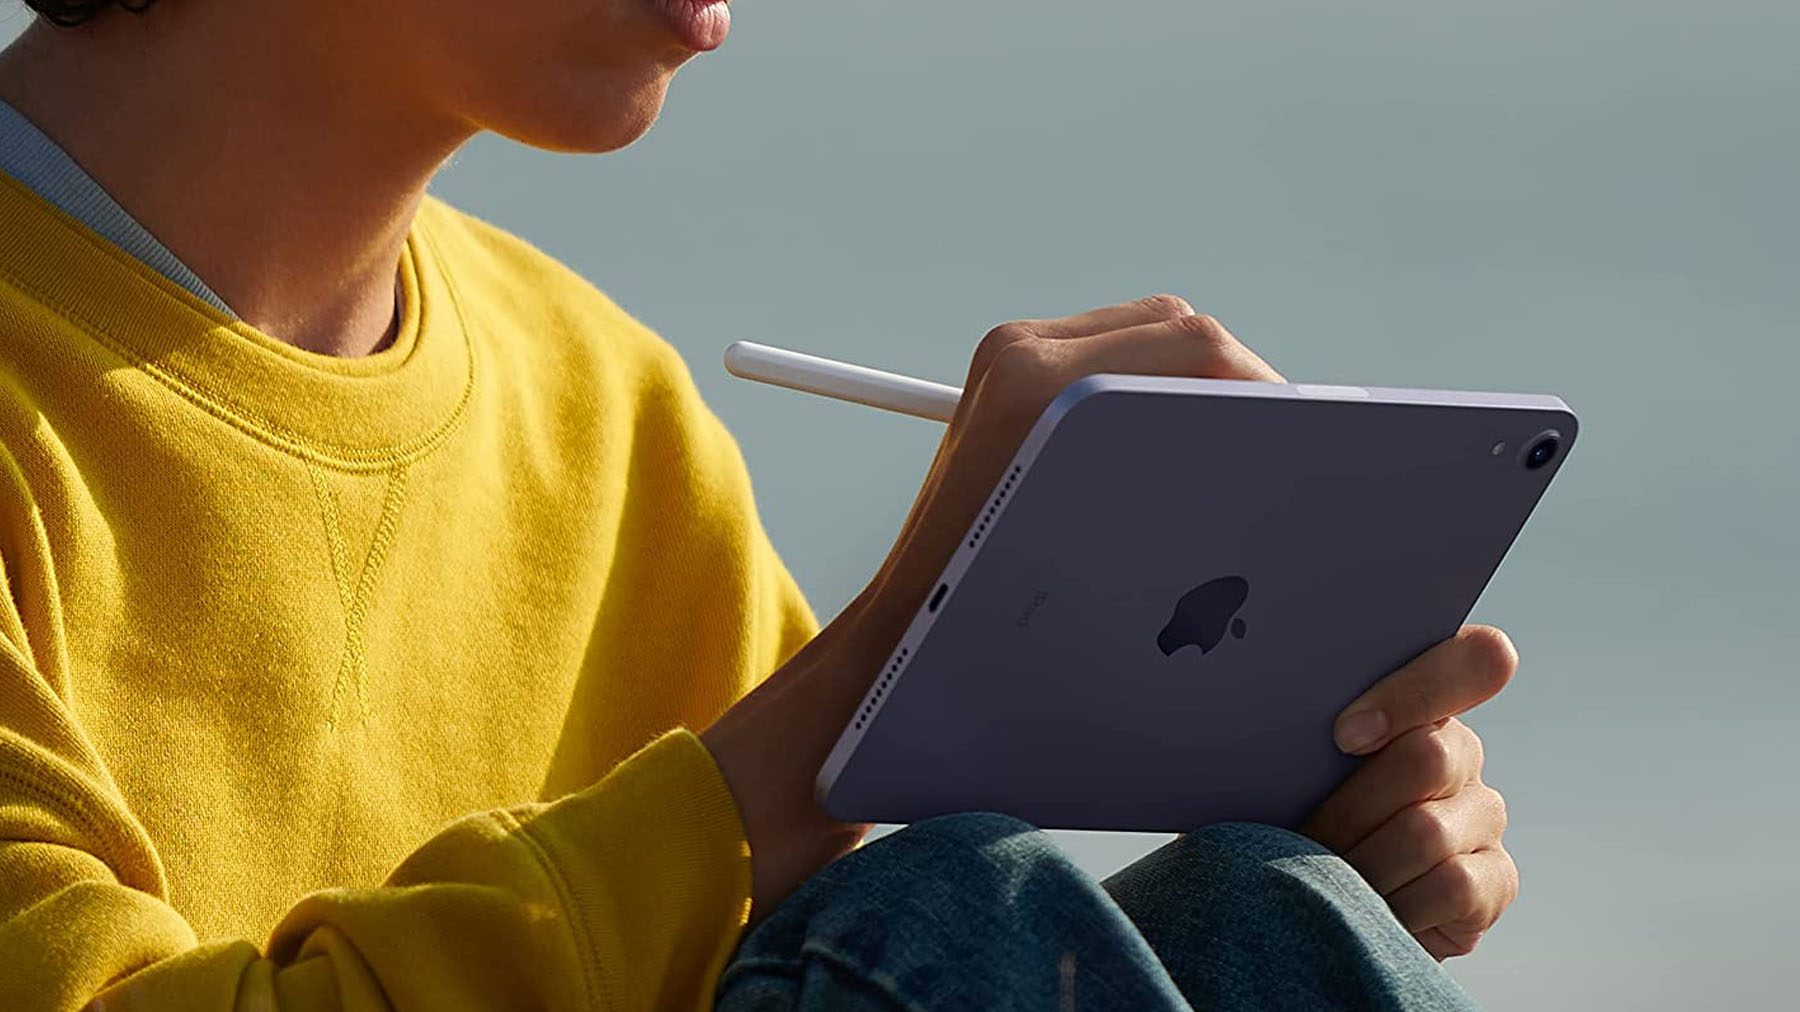 A shot of a person sitting on an iPad Mini while using an Apple Pencil